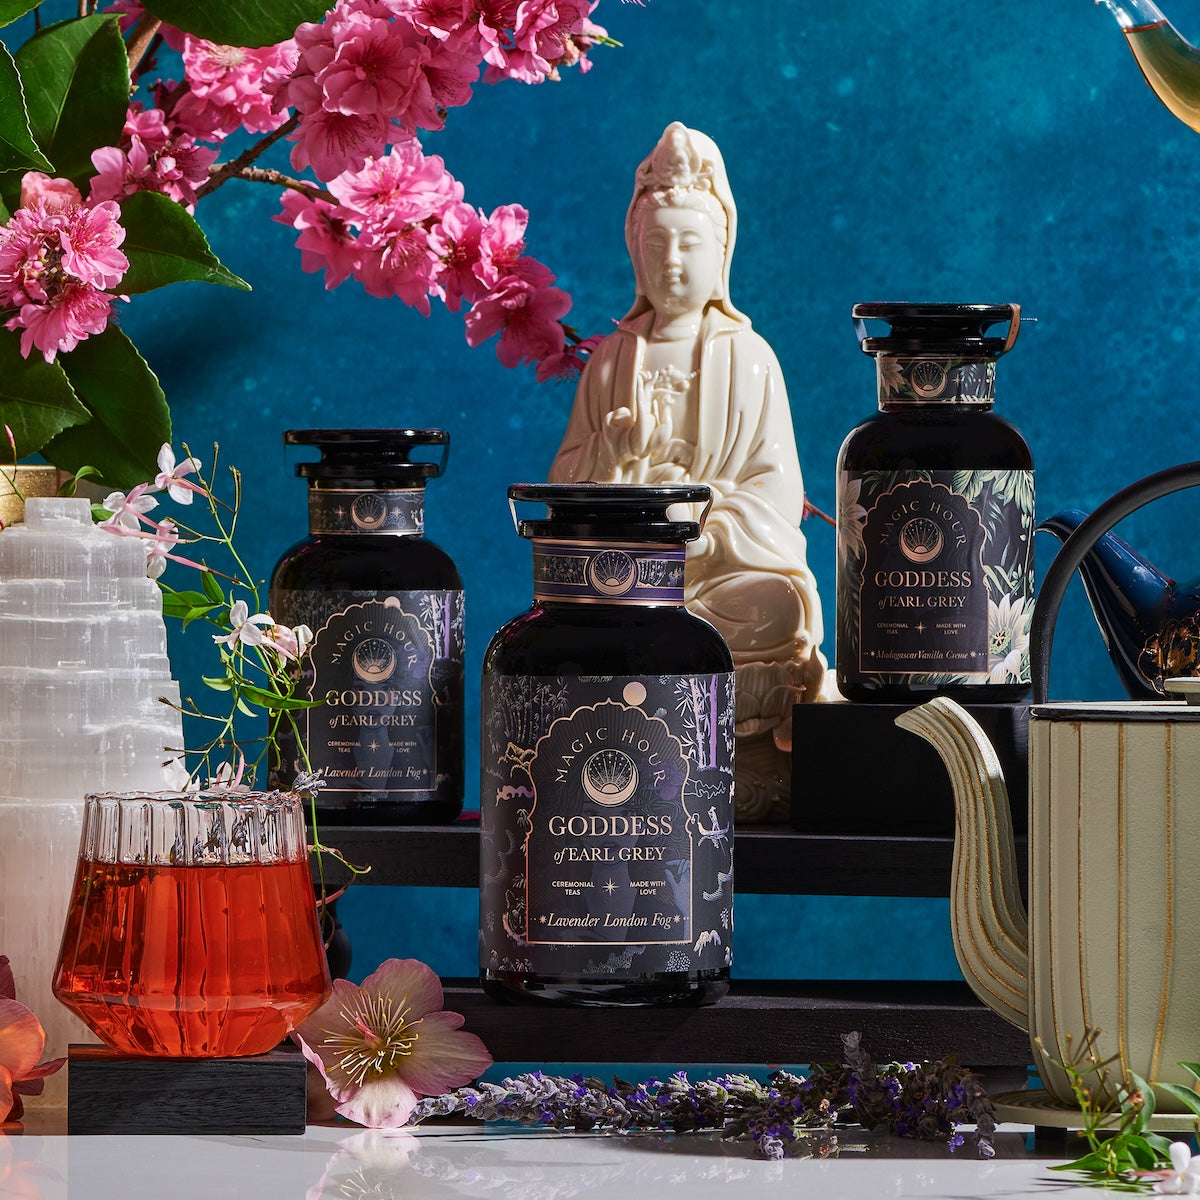 A serene display features three "Goddess of Earl: Lavender London Fog- Tea for Blooming Clarity & Calm Moods" jars by Magic Hour, a red glass of tea, and a teapot set against a blue backdrop. Pink flowers and a white statue of a seated figure complete the tranquil scene. A white crystal, decorative tea accessories, and the aromatherapeutic benefits of Lavender Earl Grey enhance relaxation and calm focus.